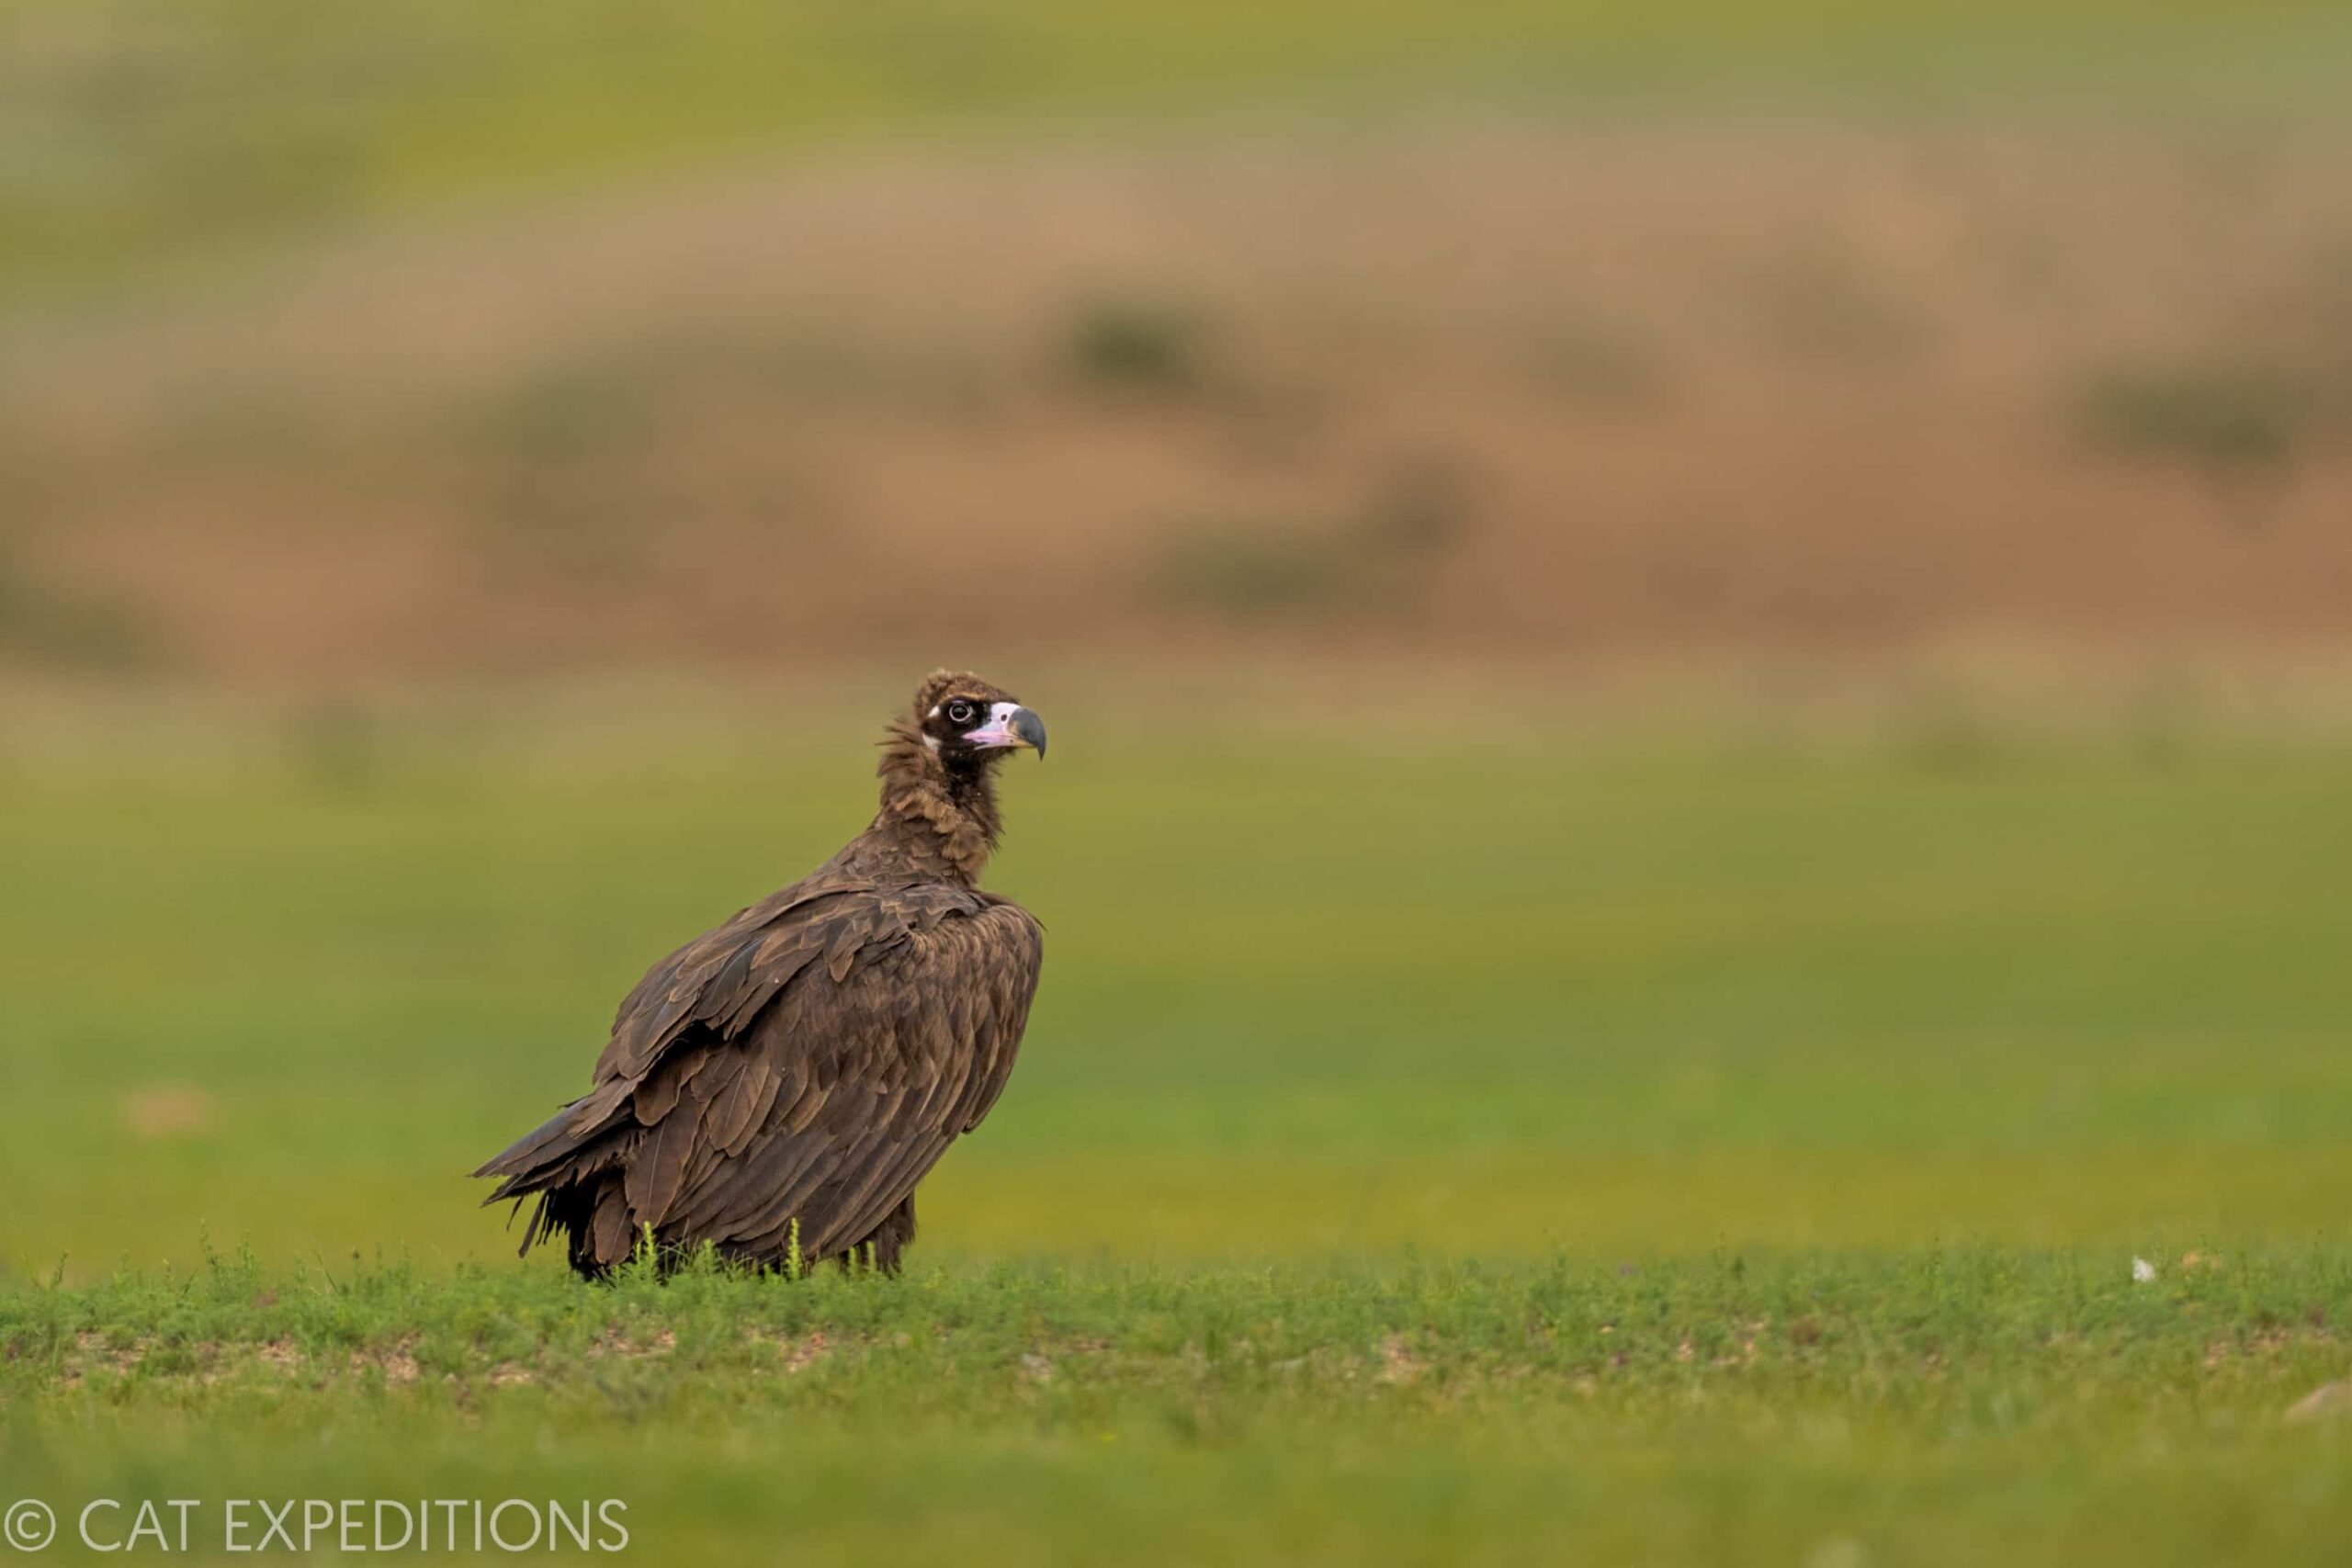 Cinereous Vulture (Aegypius monachus) photographed near the road on our way to eastern Mongolia